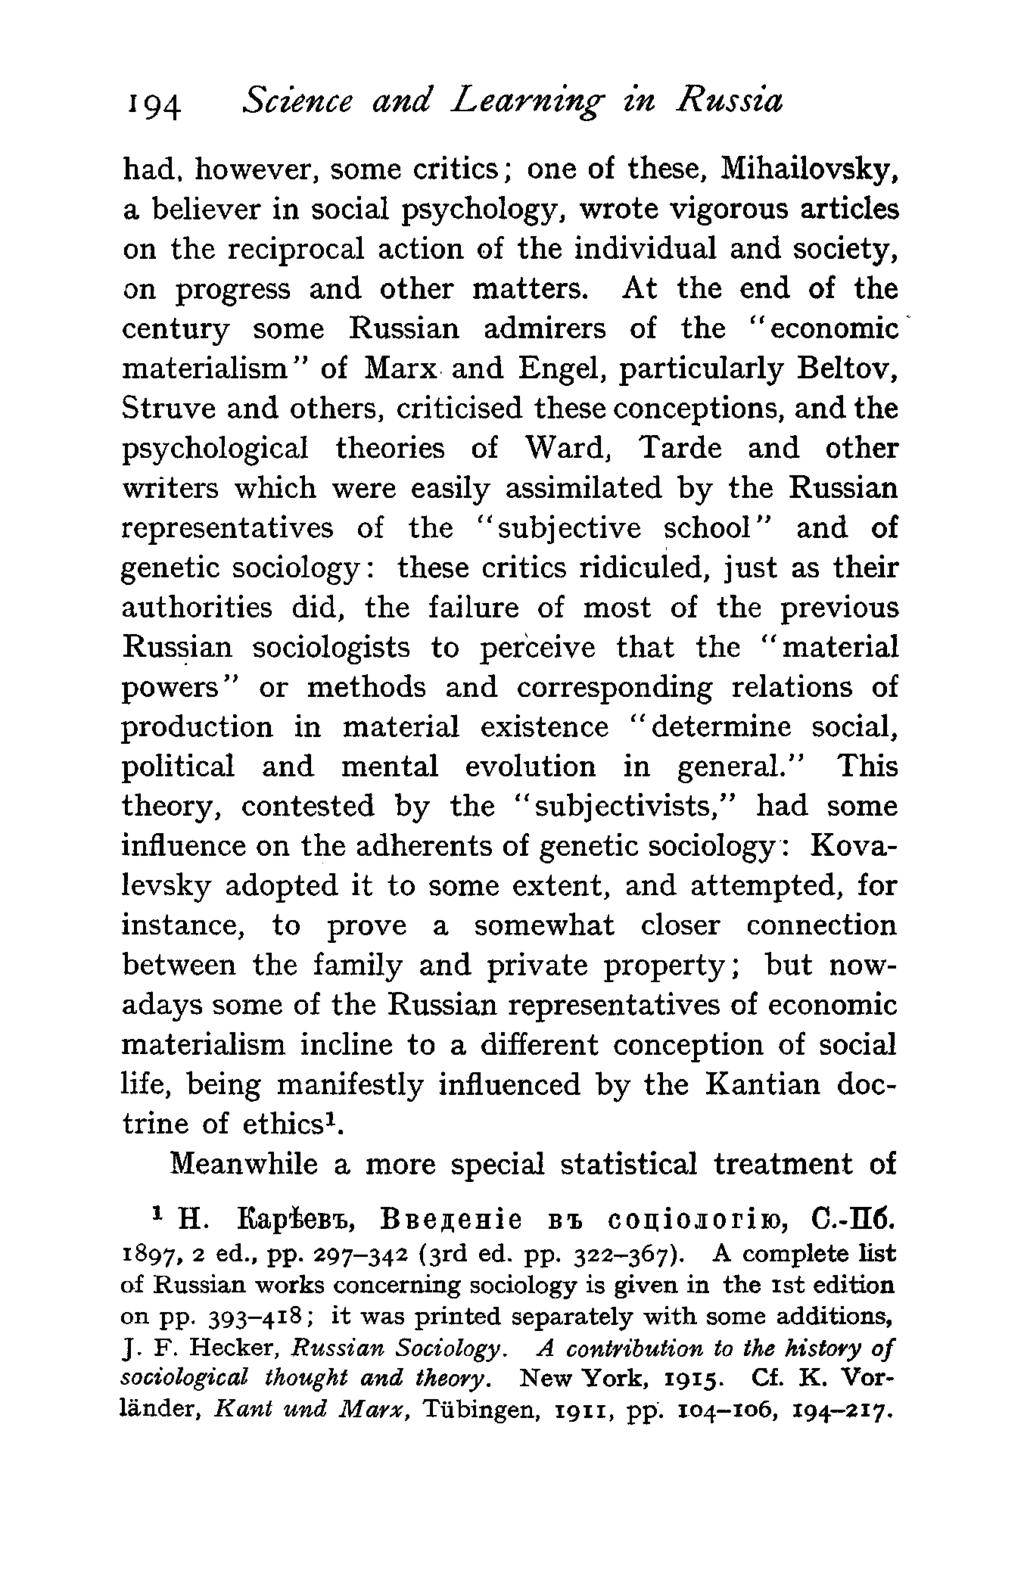 194 Science and Learning in Russia had, however, some critics; one of these, Mihailovsky, a believer in social psychology, wrote vigorous articles on the reciprocal action of the individual and